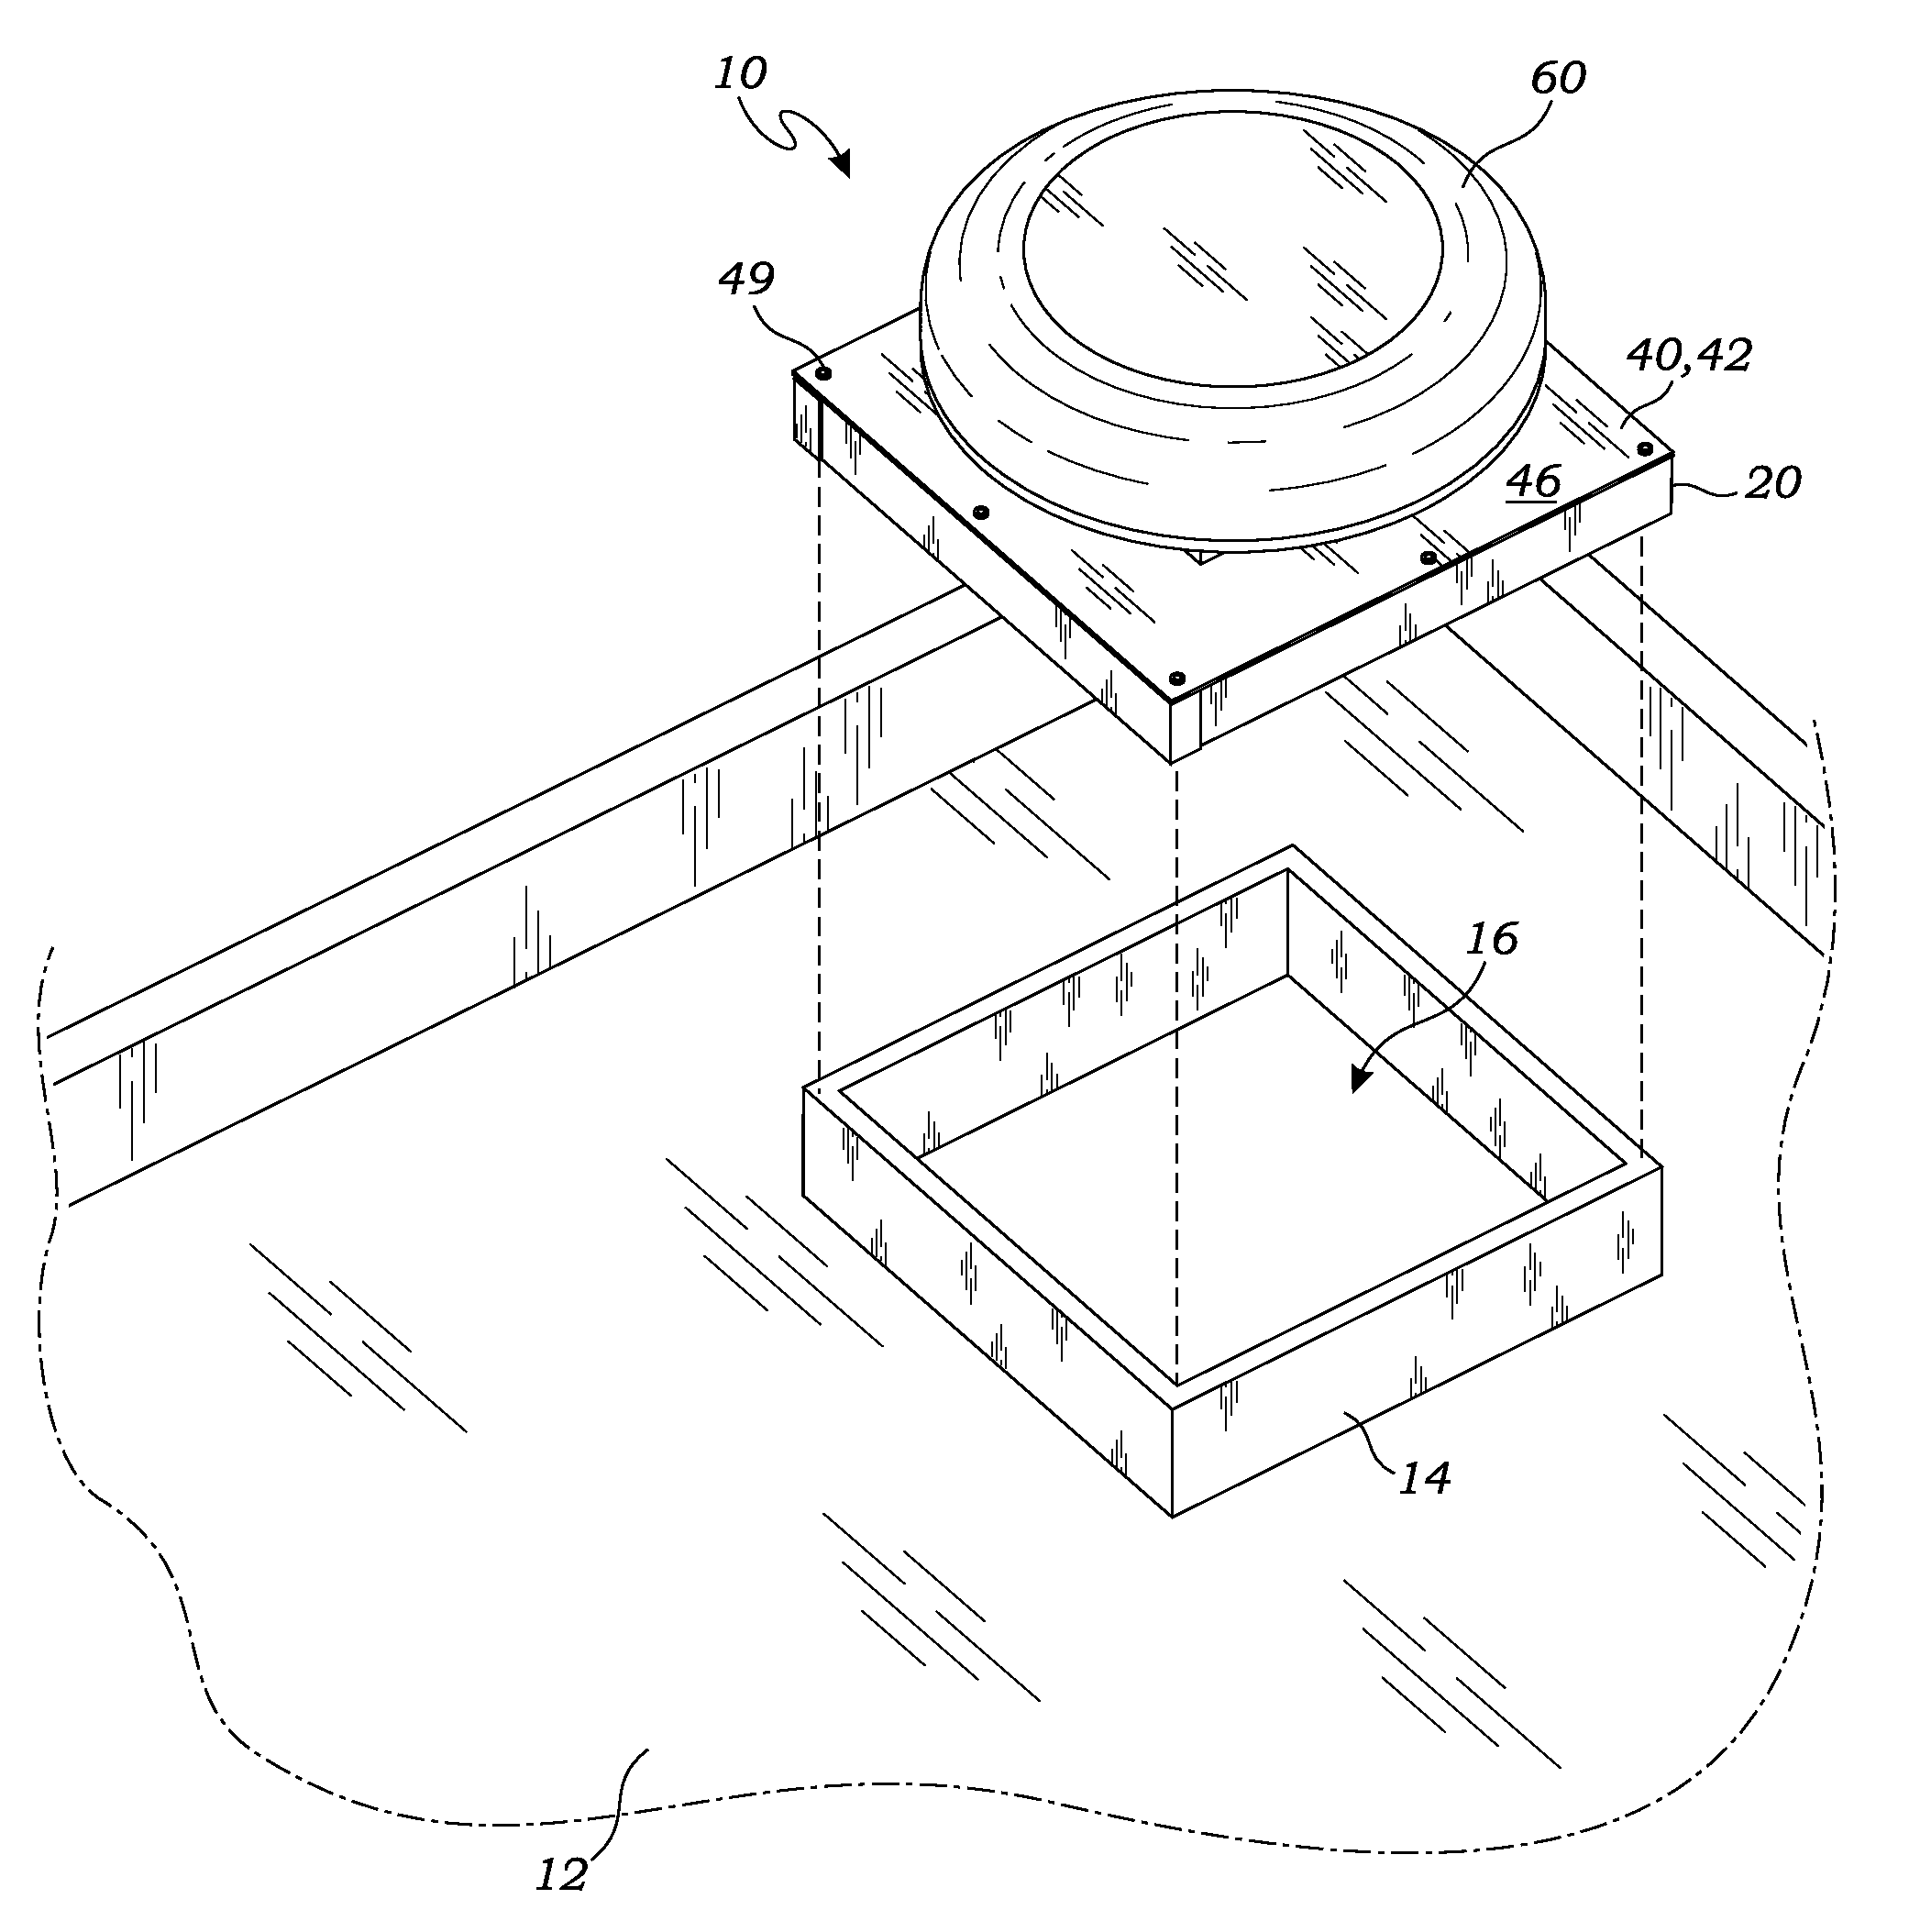 Method for installing a roof vent